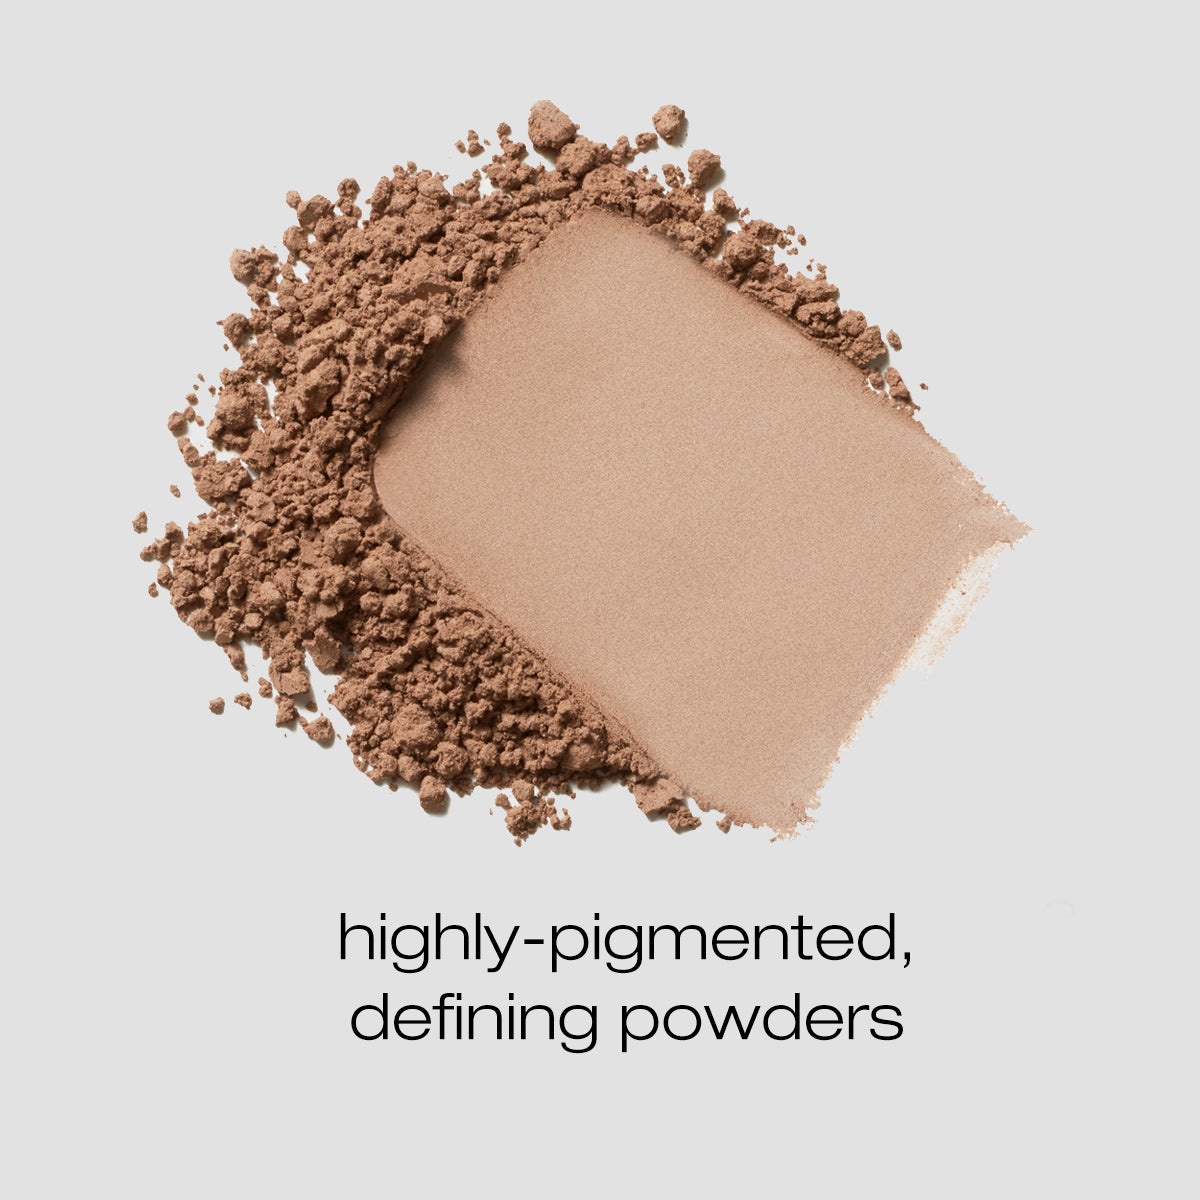 Spread of brown sugar described as a highly pigmented and defining powders